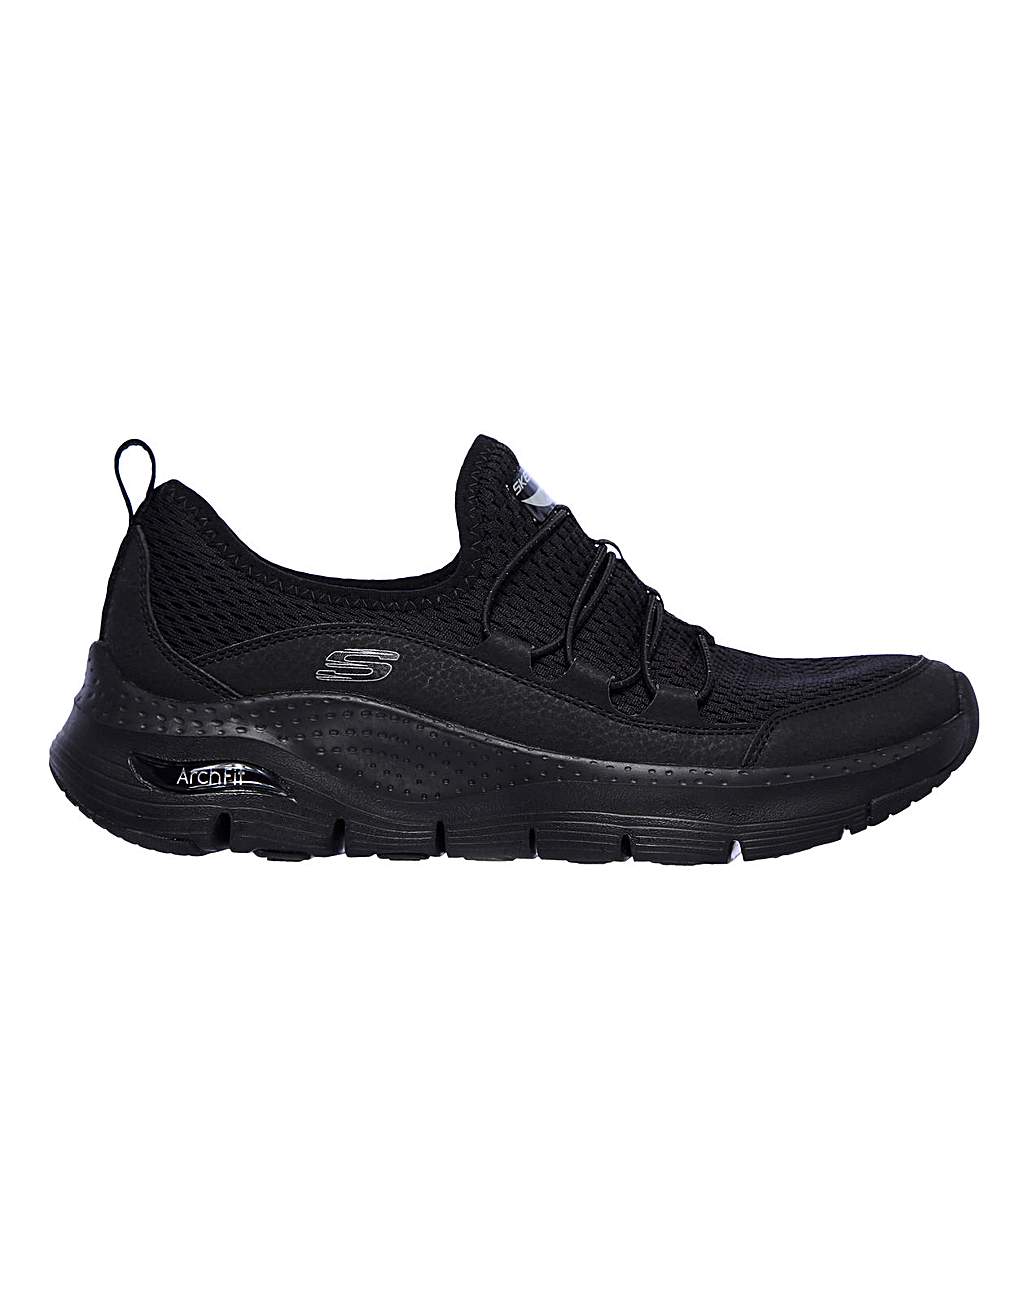 Skechers Arch Fit Lucky Thoughts 